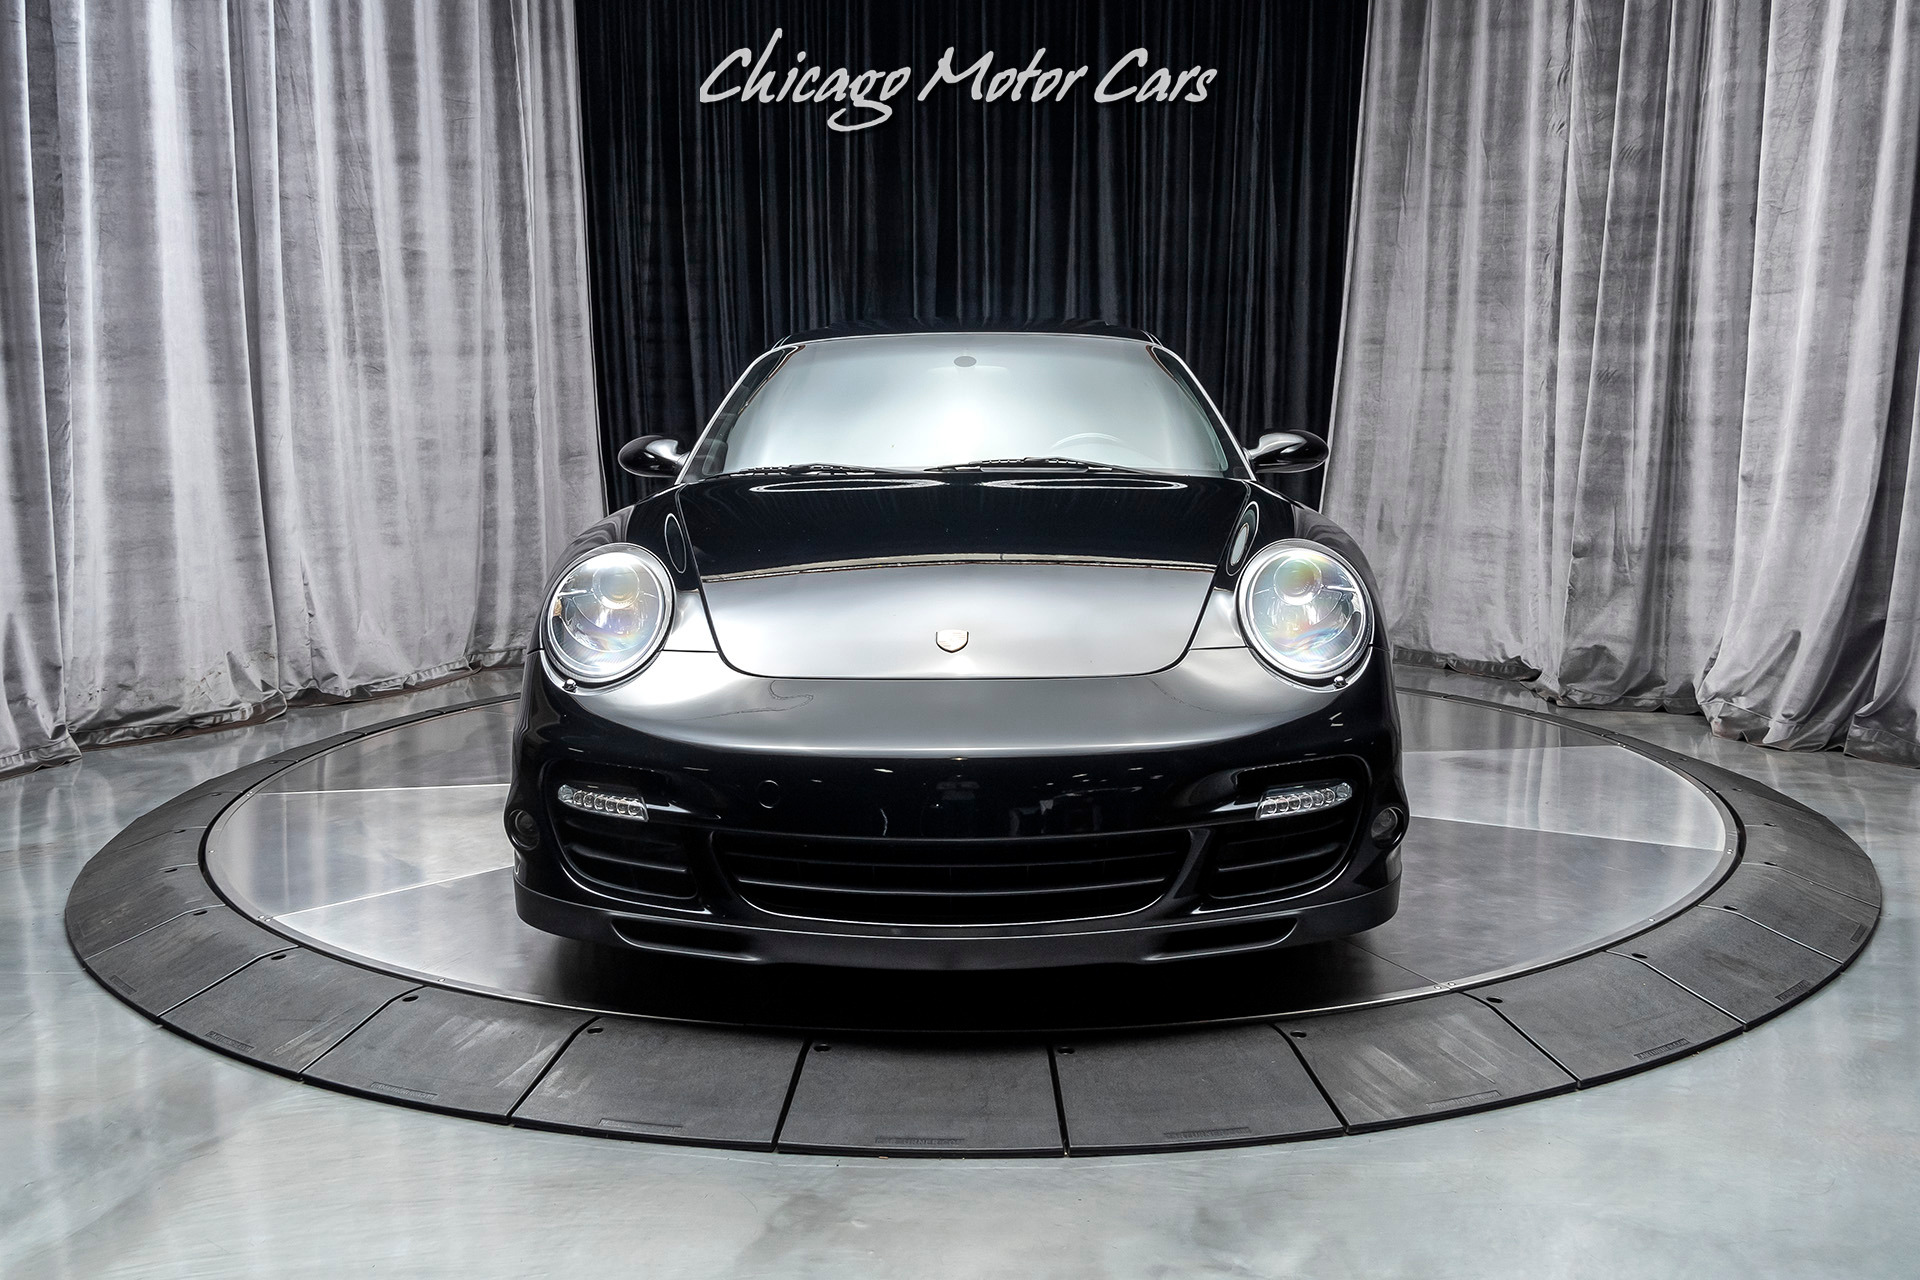 Used-2009-Porsche-911-Turbo-Coupe---Original-145k-MSRP-Only-12k-Miles-6-Speed-Manual